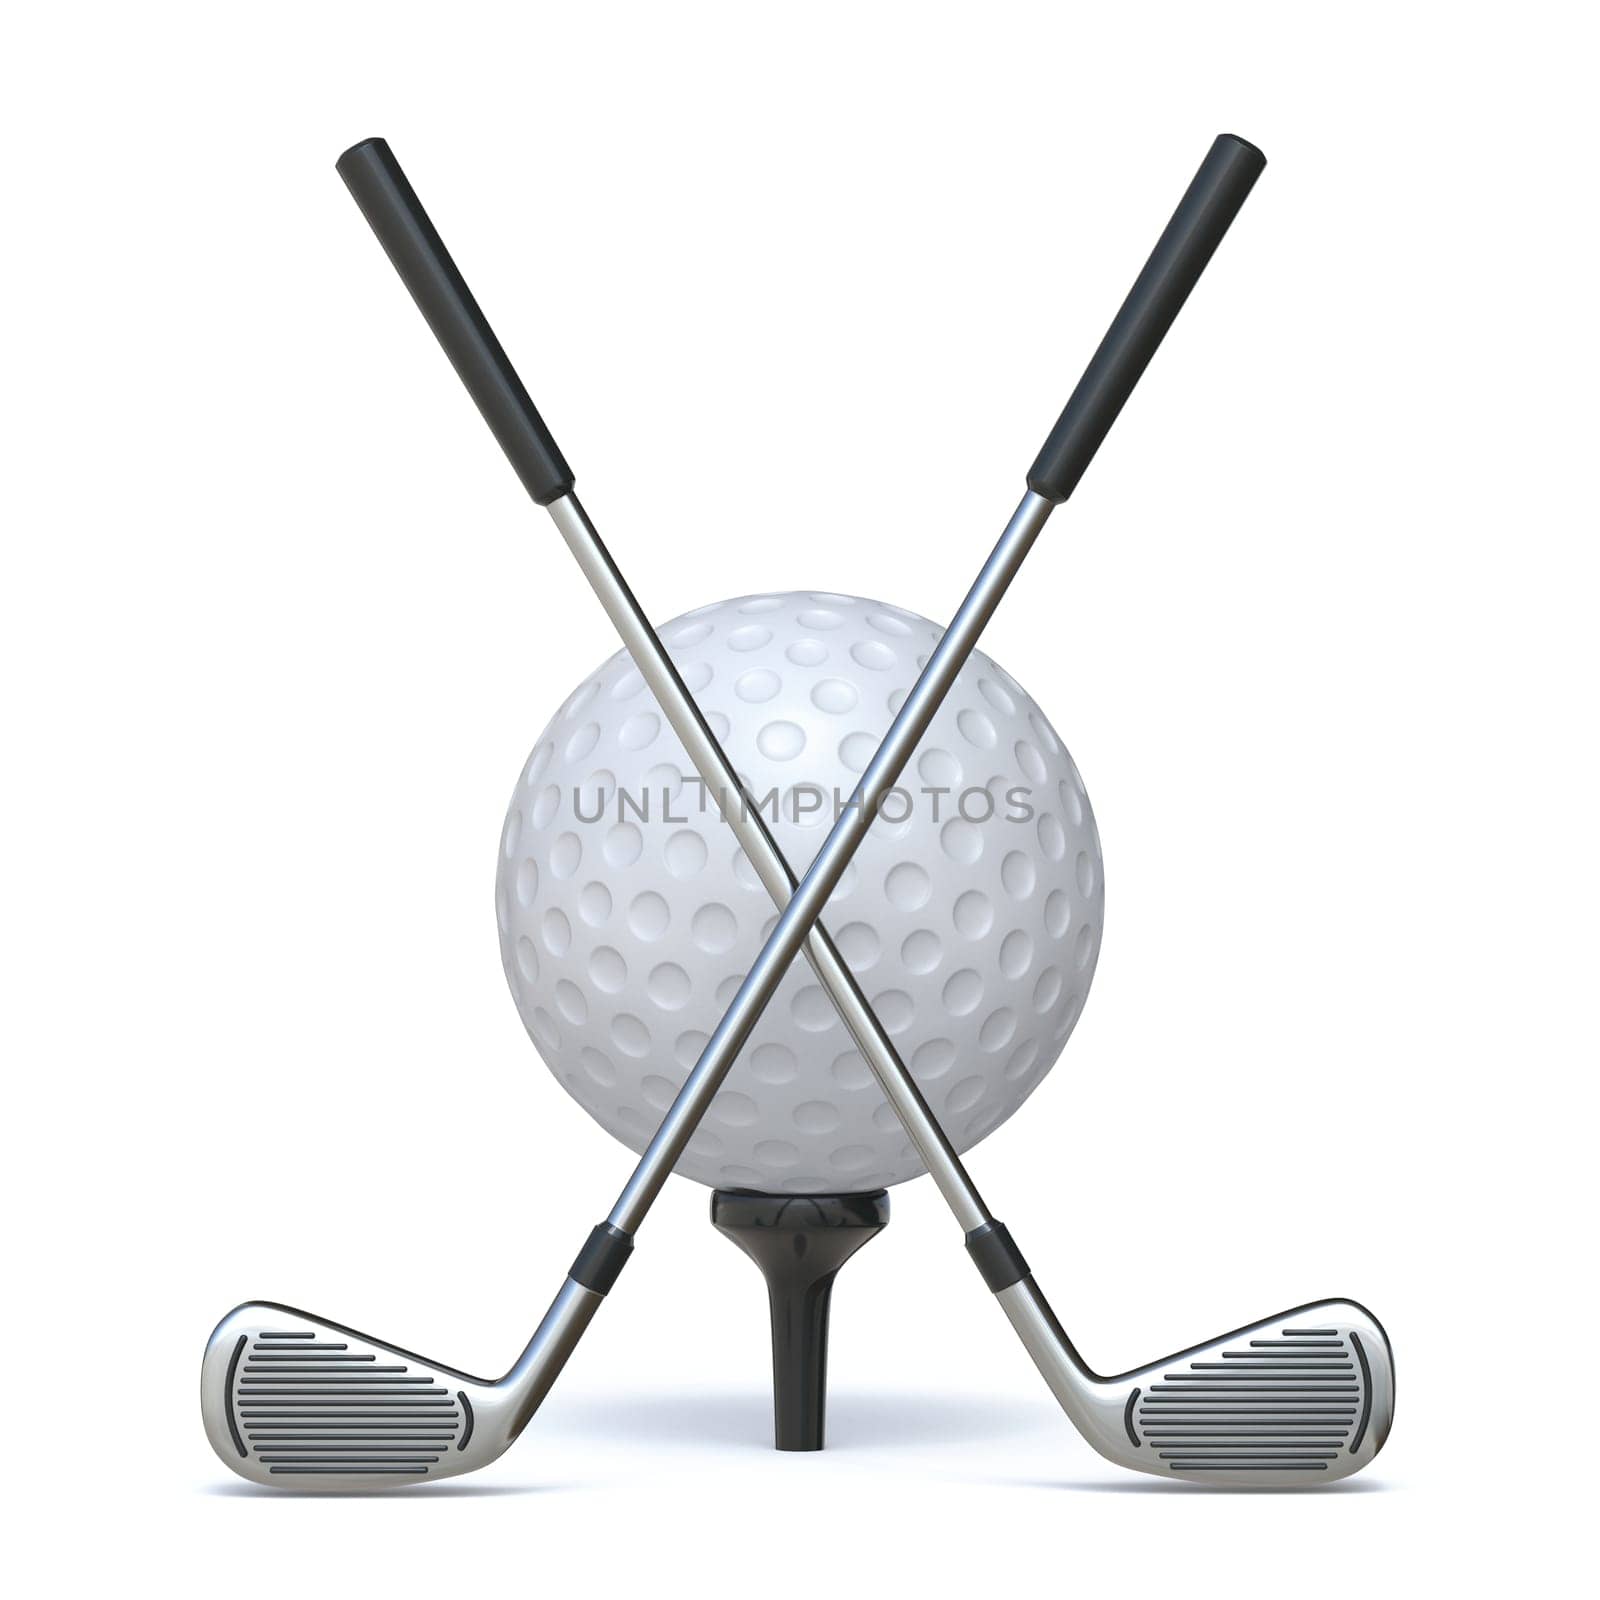 Golf clubs and golf ball 3D rendering illustration isolated on white background